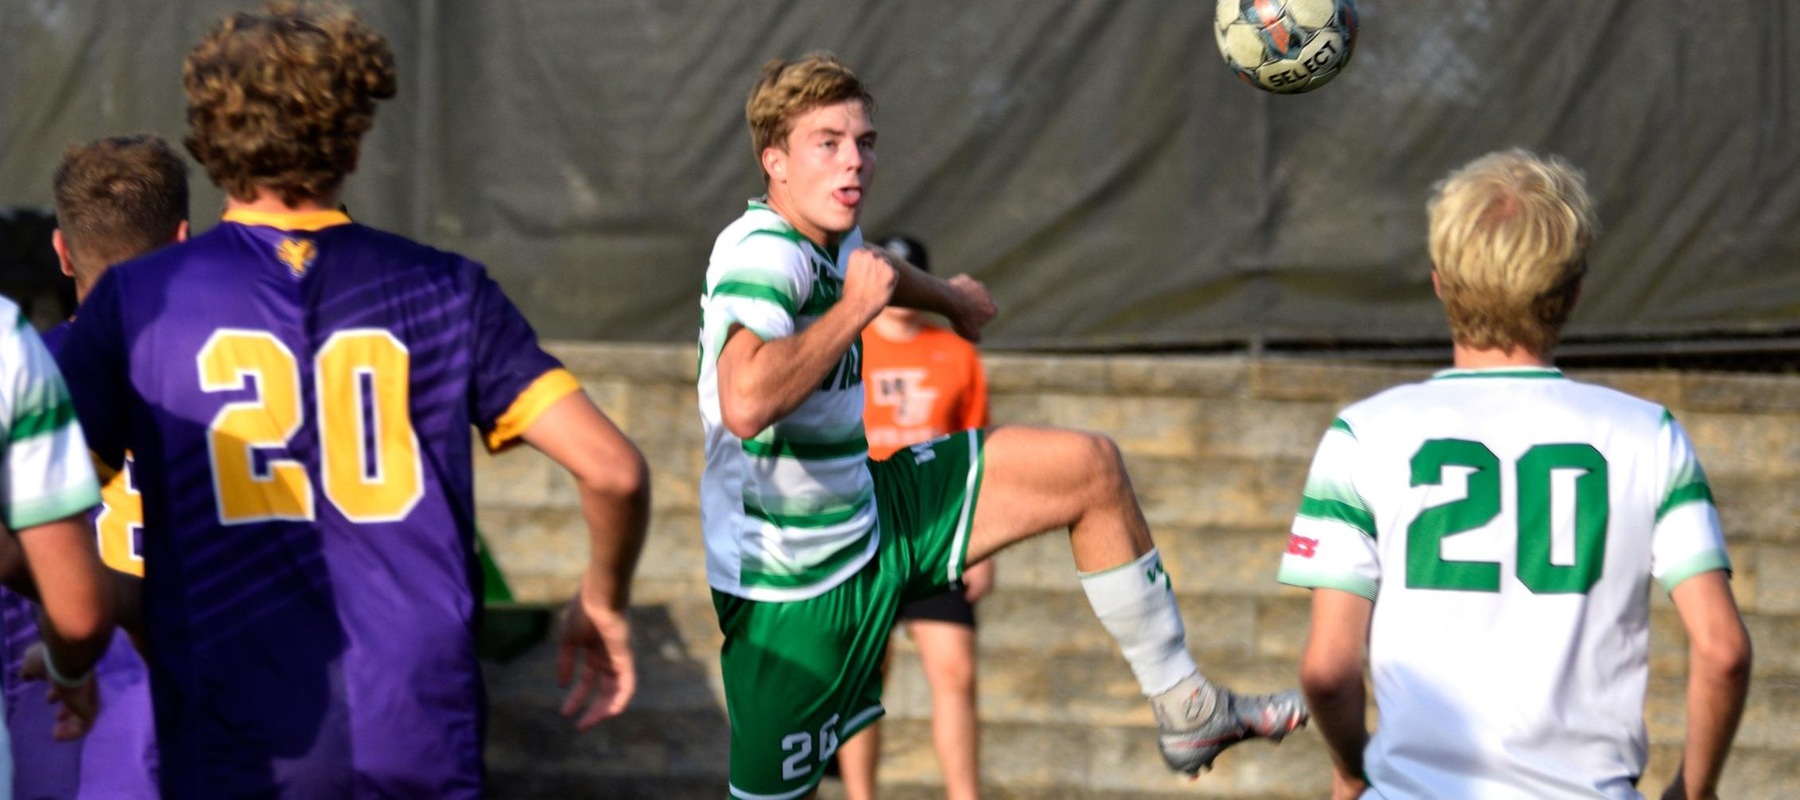 Wilmington University’s Malthe Hannesbo(26) kicks and scores the winning goal against West Chester University during their NCAA Mens soccer match at the Wilmington University Sports complex in Newark, Delaware, October 12, 2022. Photo By Amanda Angell